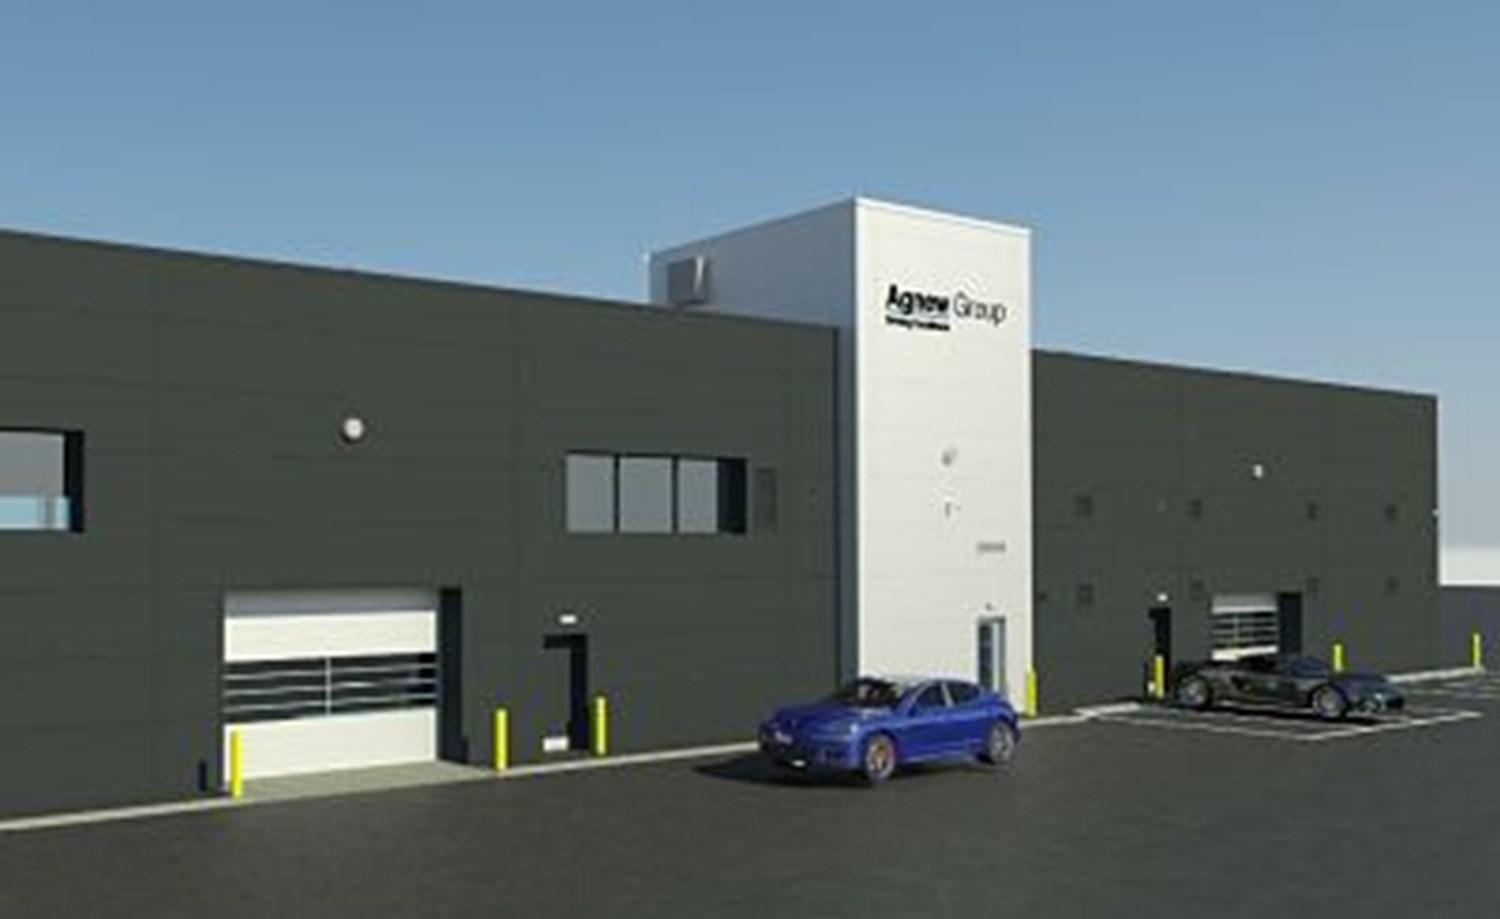 New Investment in a 23,000 sq ft Bodyshop, Valet and Vehicle Preparation Centre